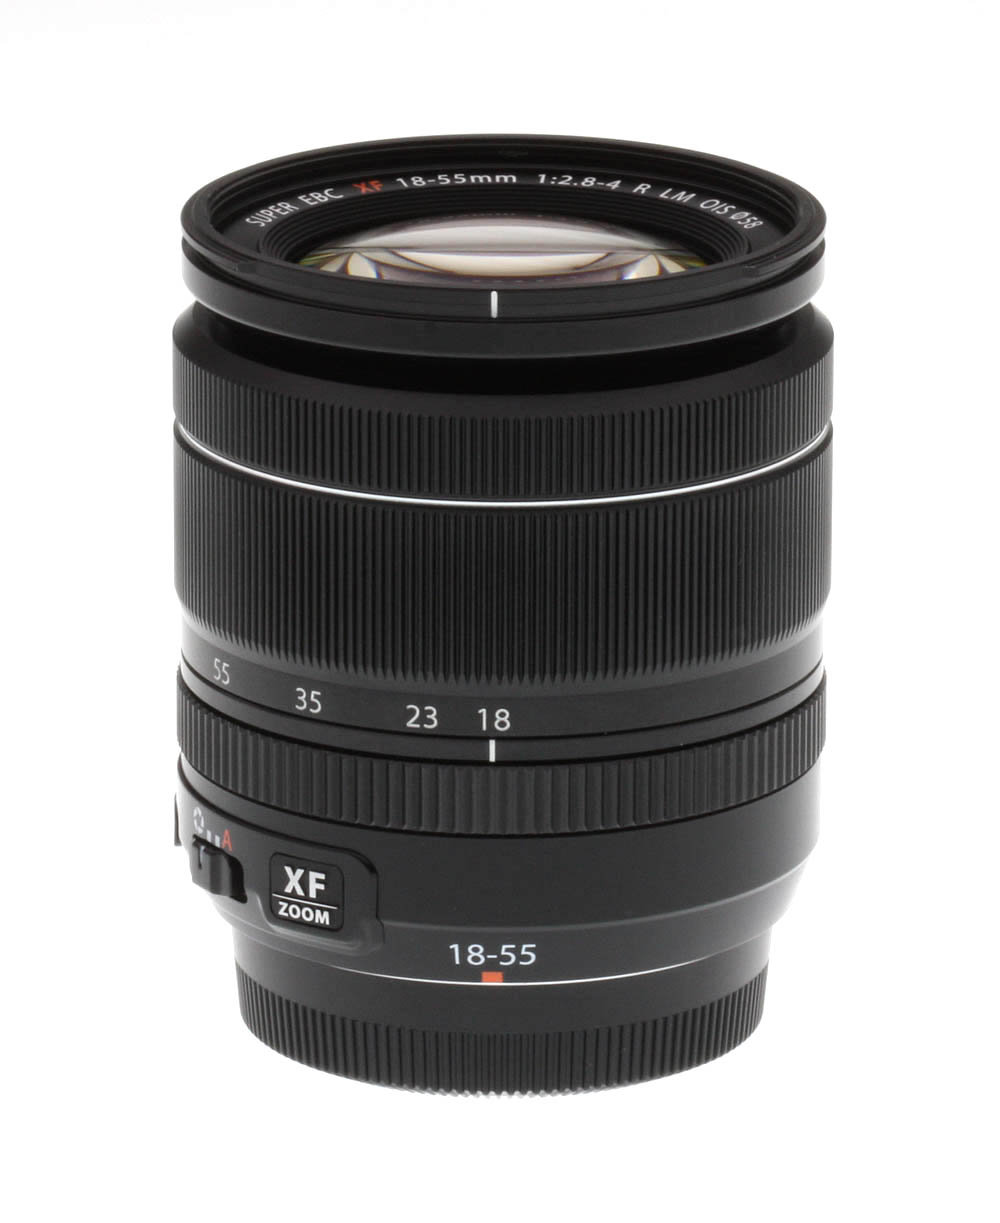 Fujinon XF 18-55mm f/2.8-4 R LM OIS Review